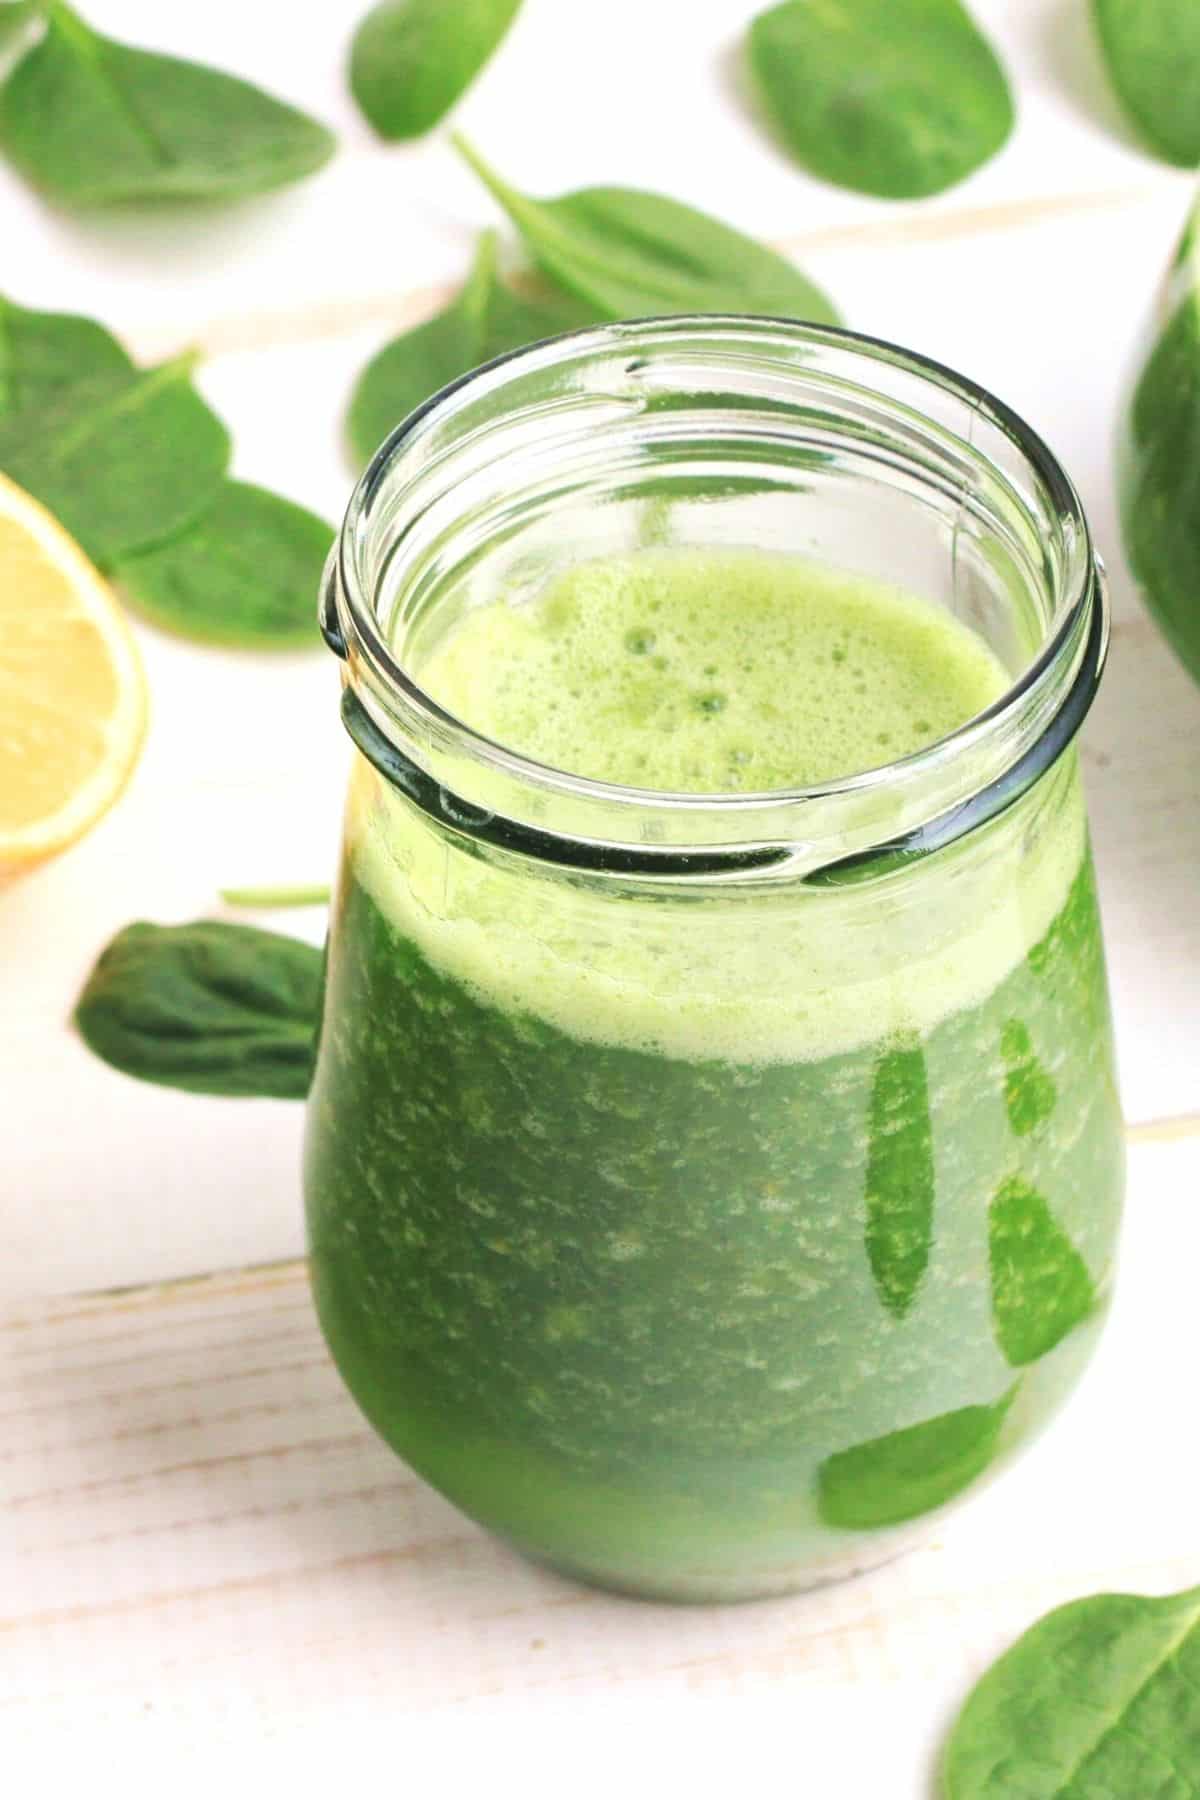 a glass of green juice.